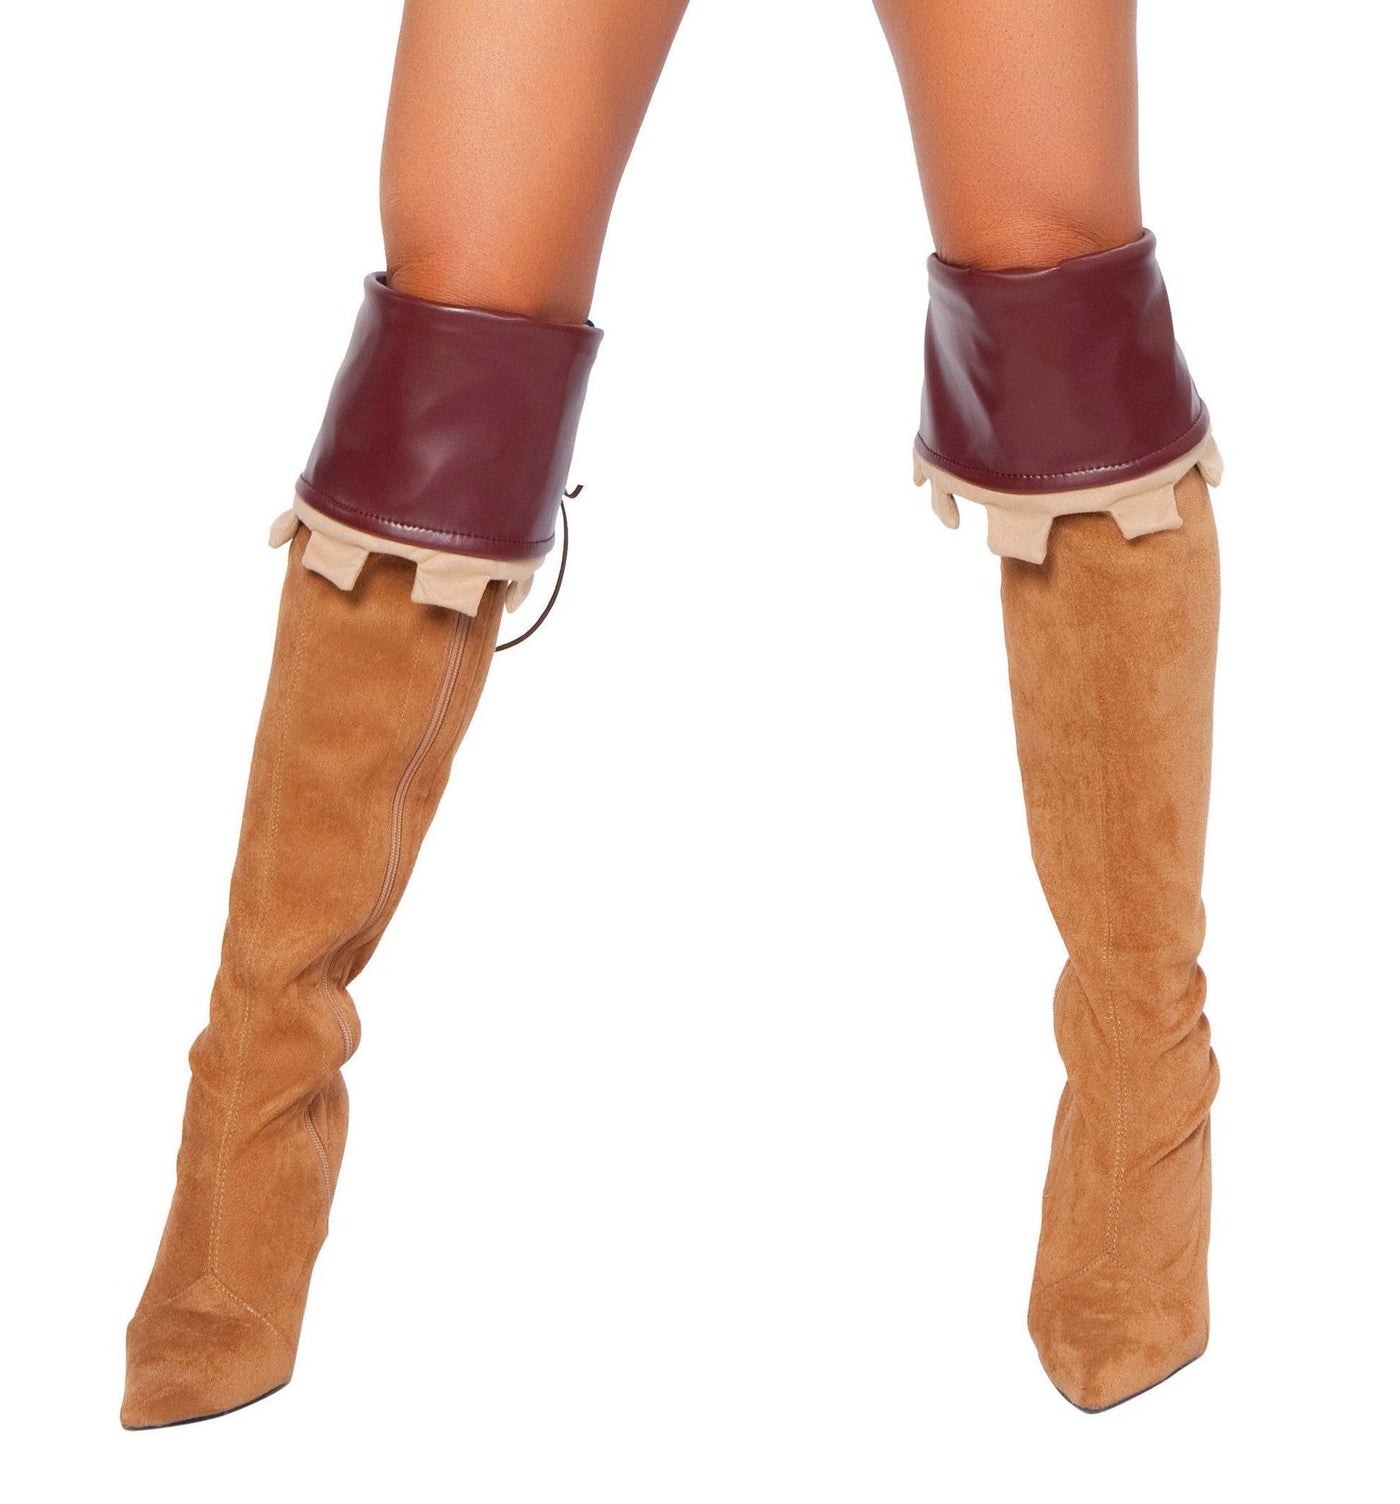 Buy Pair of Brown Boot Cuffs from RomaRetailShop for 5.99 with Same Day Shipping Designed by Roma Costume 4265B-AS-O/S